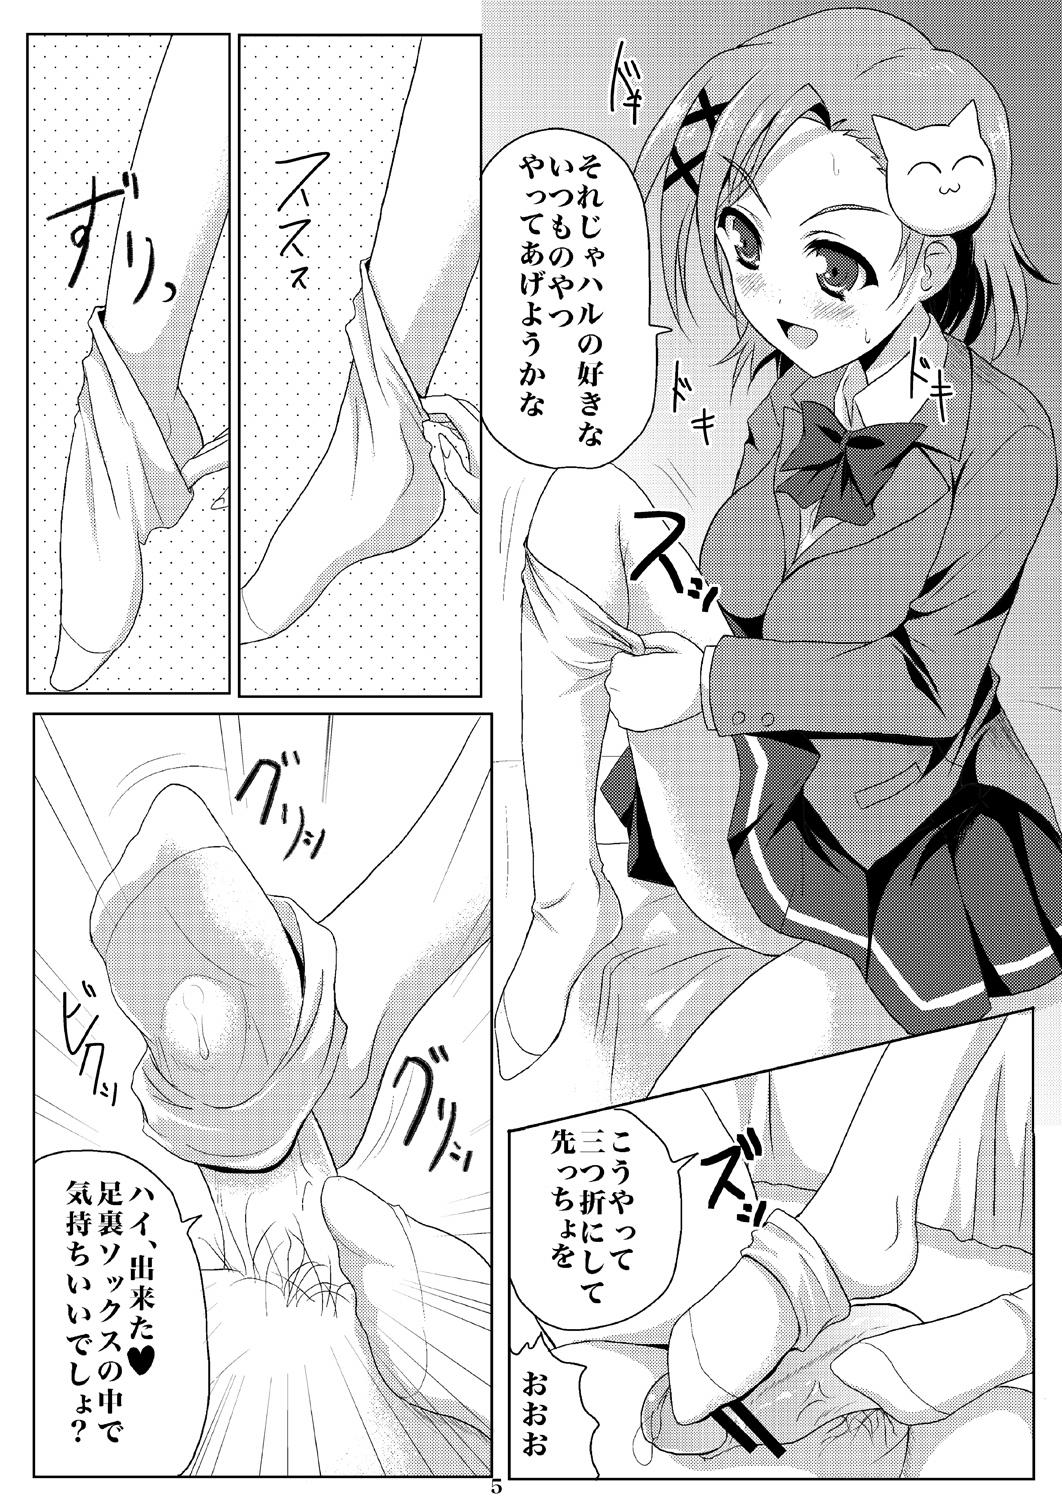 Young Old New World - Accel world Anal Play - Page 3